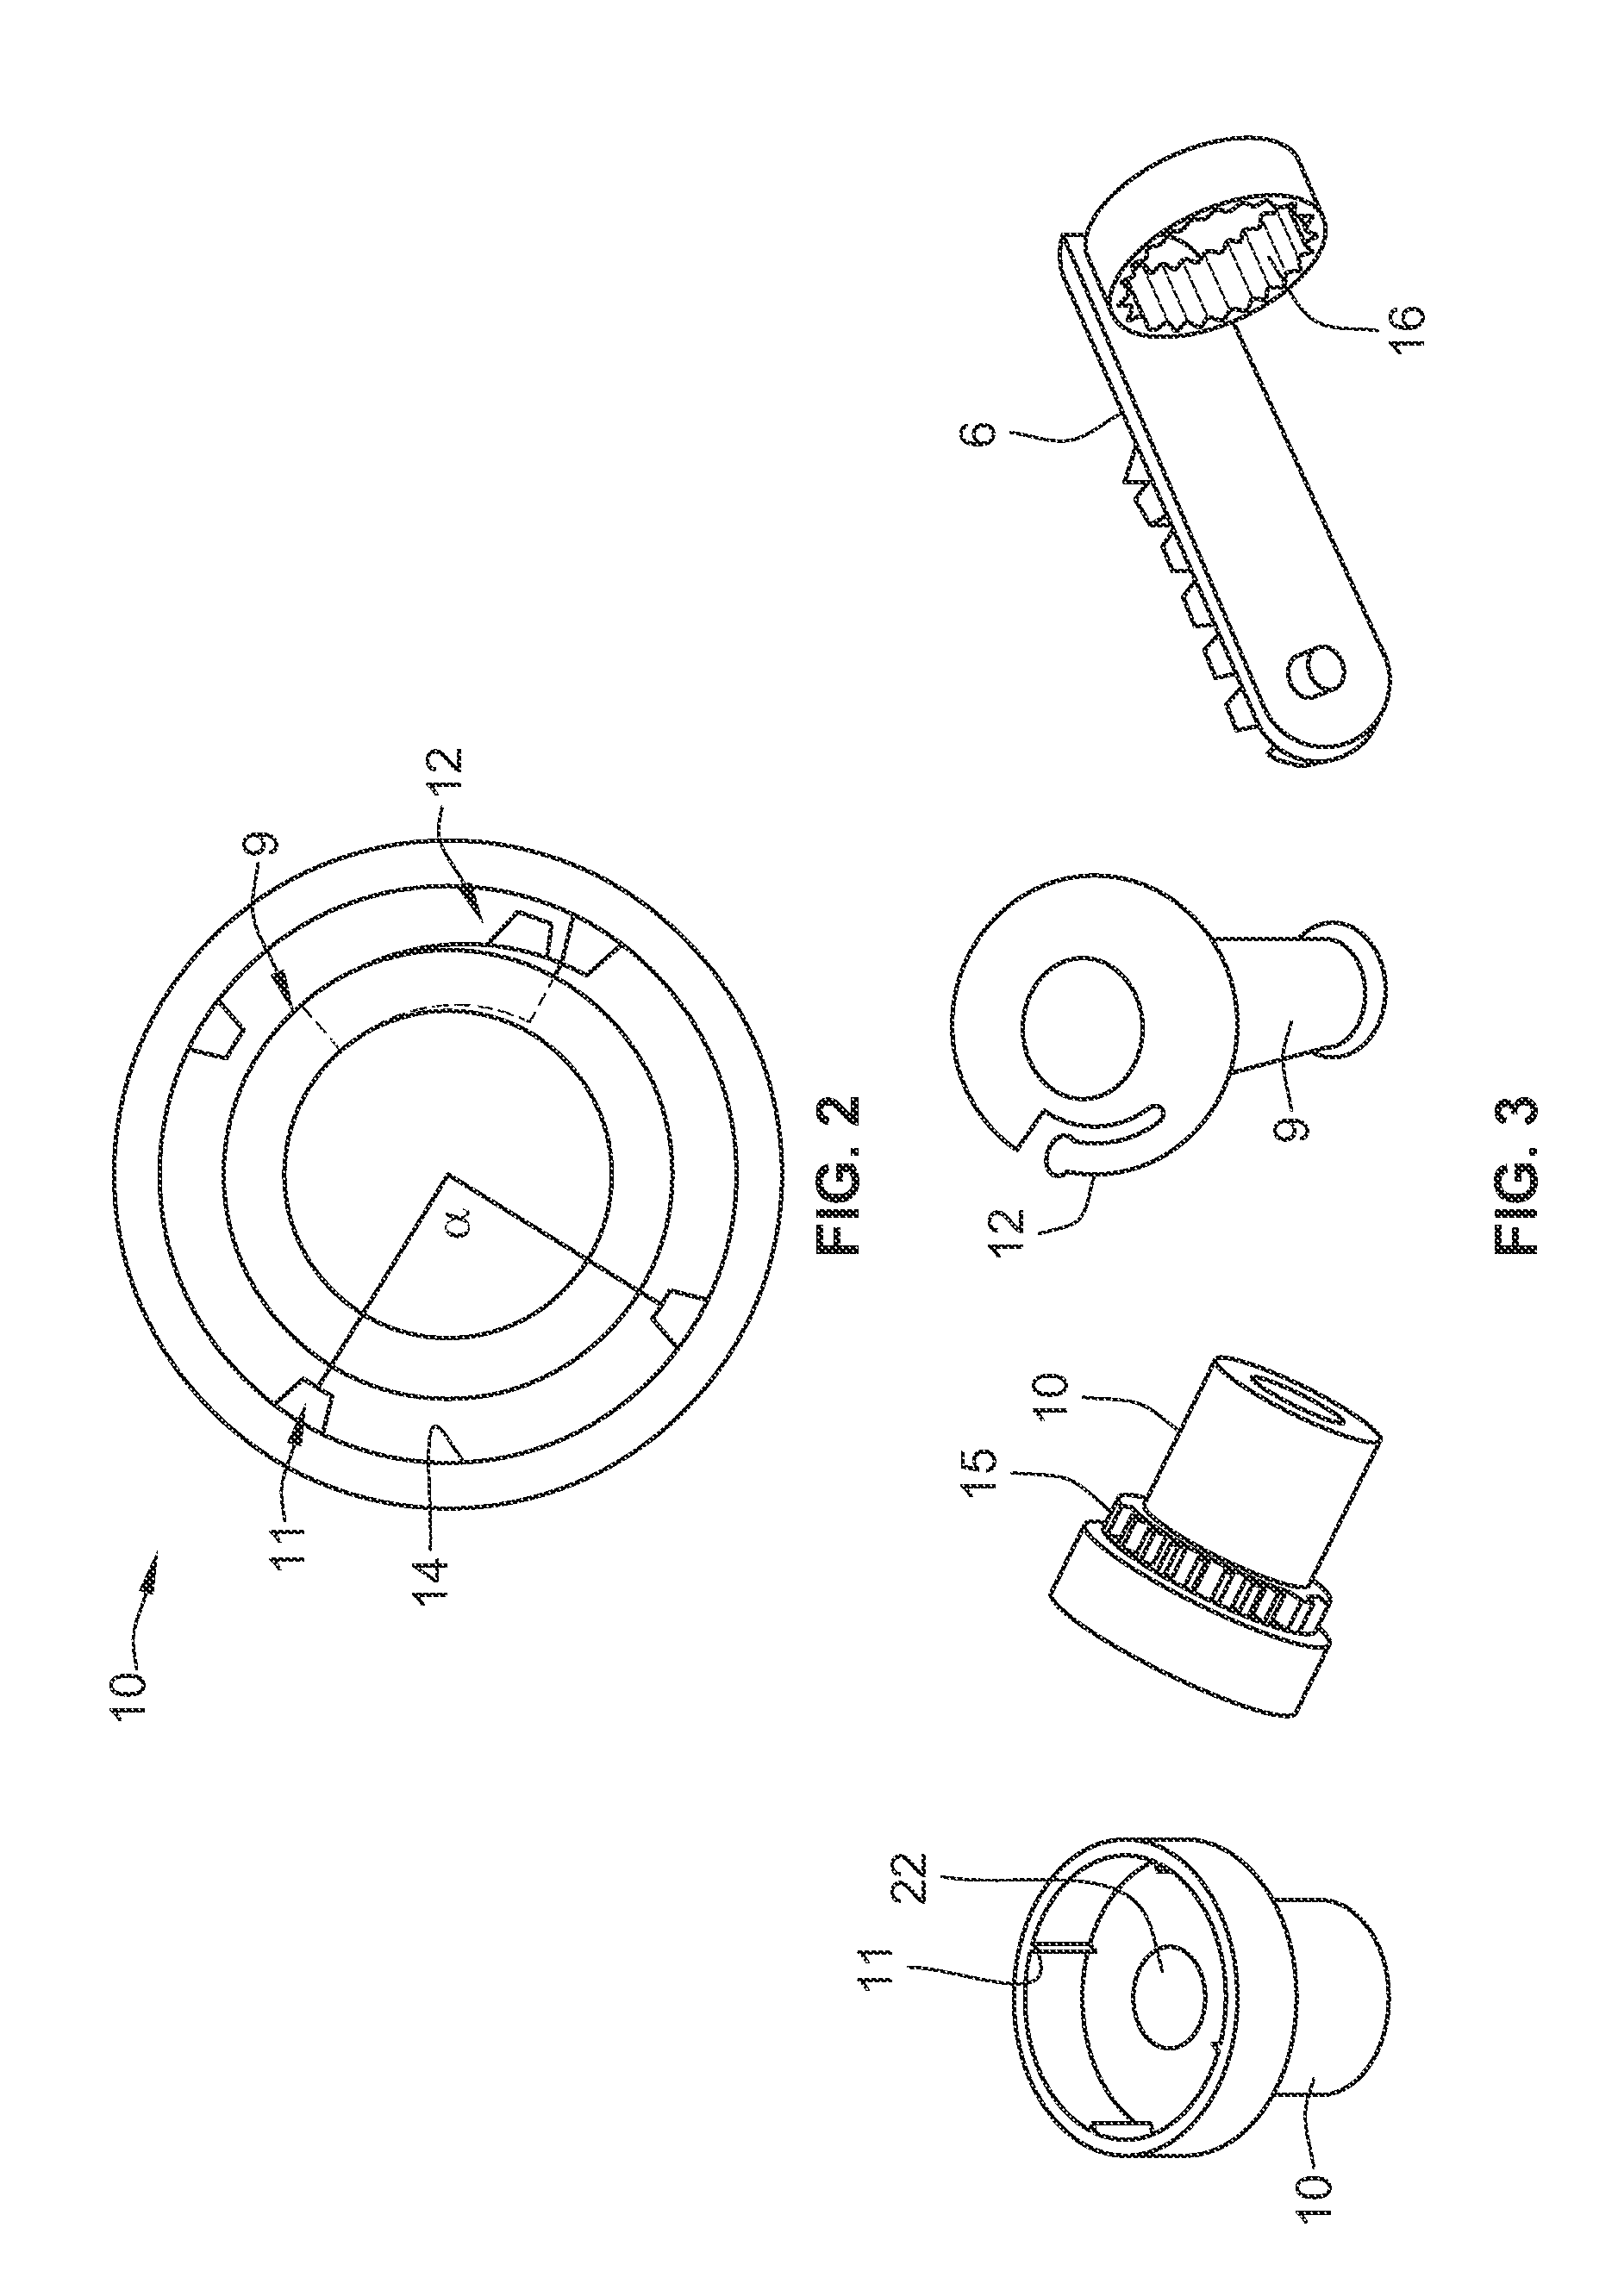 Automatic injection device with torsional spring